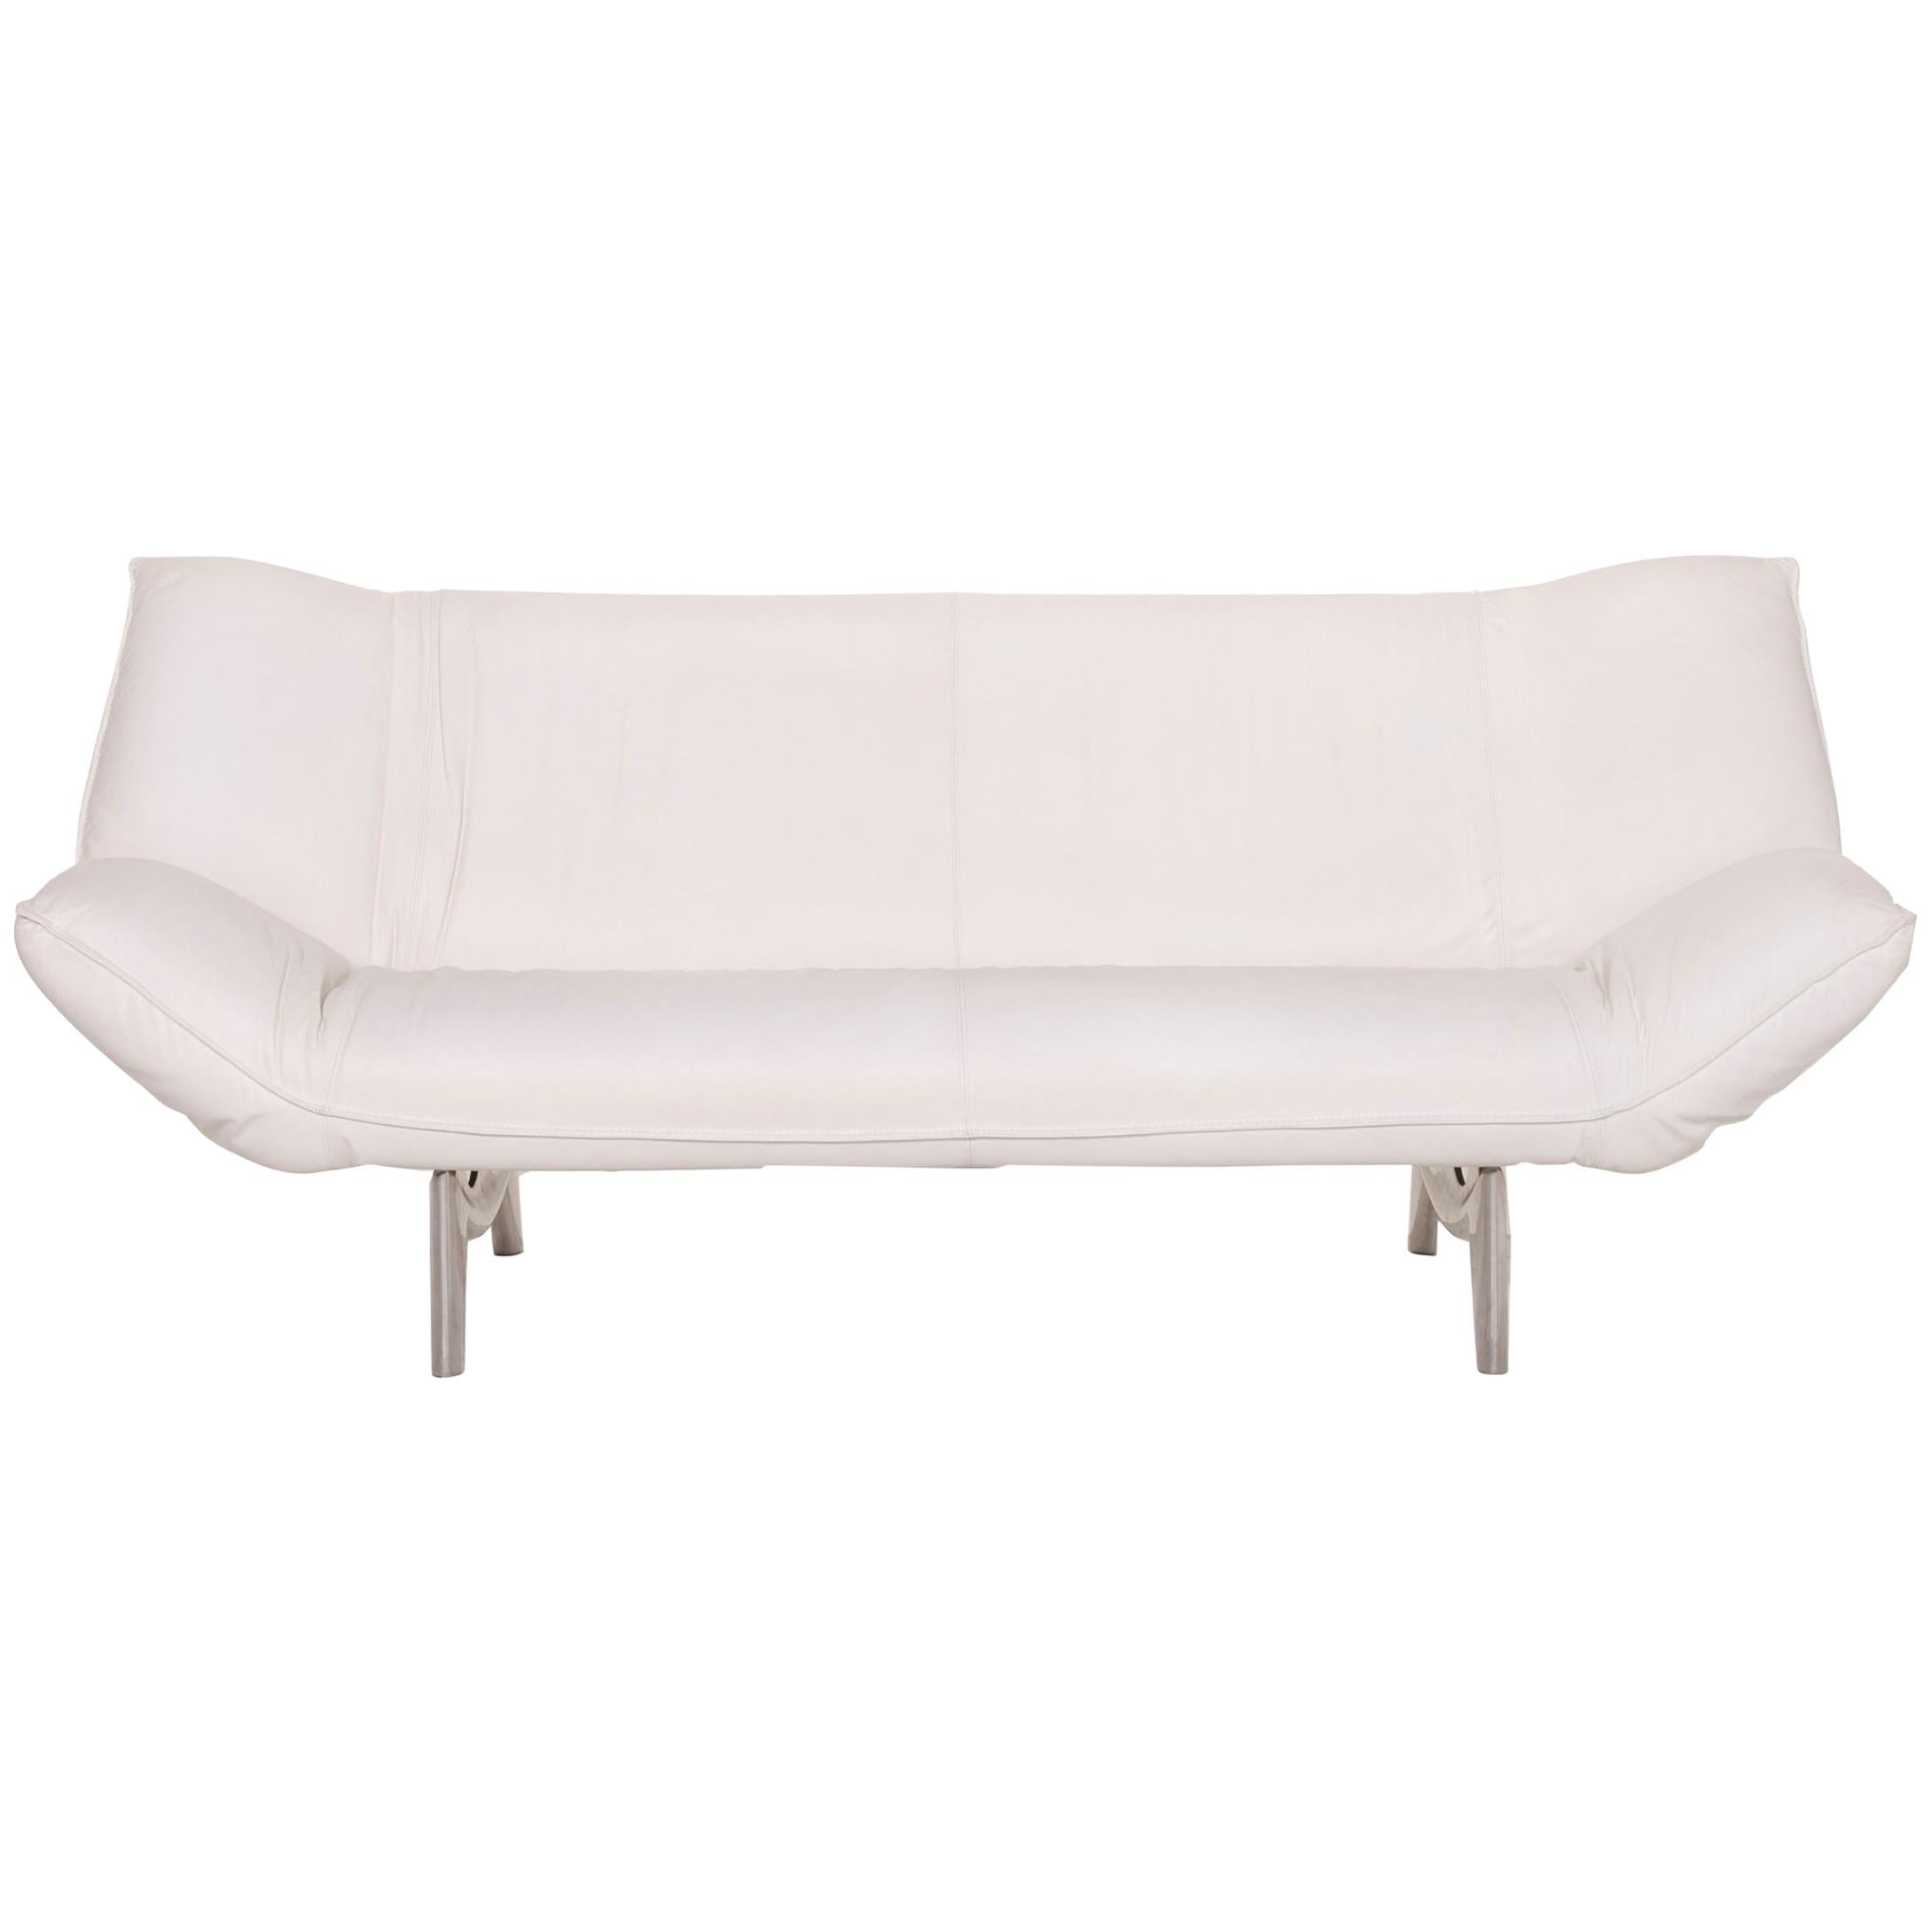 Leolux Tango Leather Sofa White Two-Seater Function For Sale